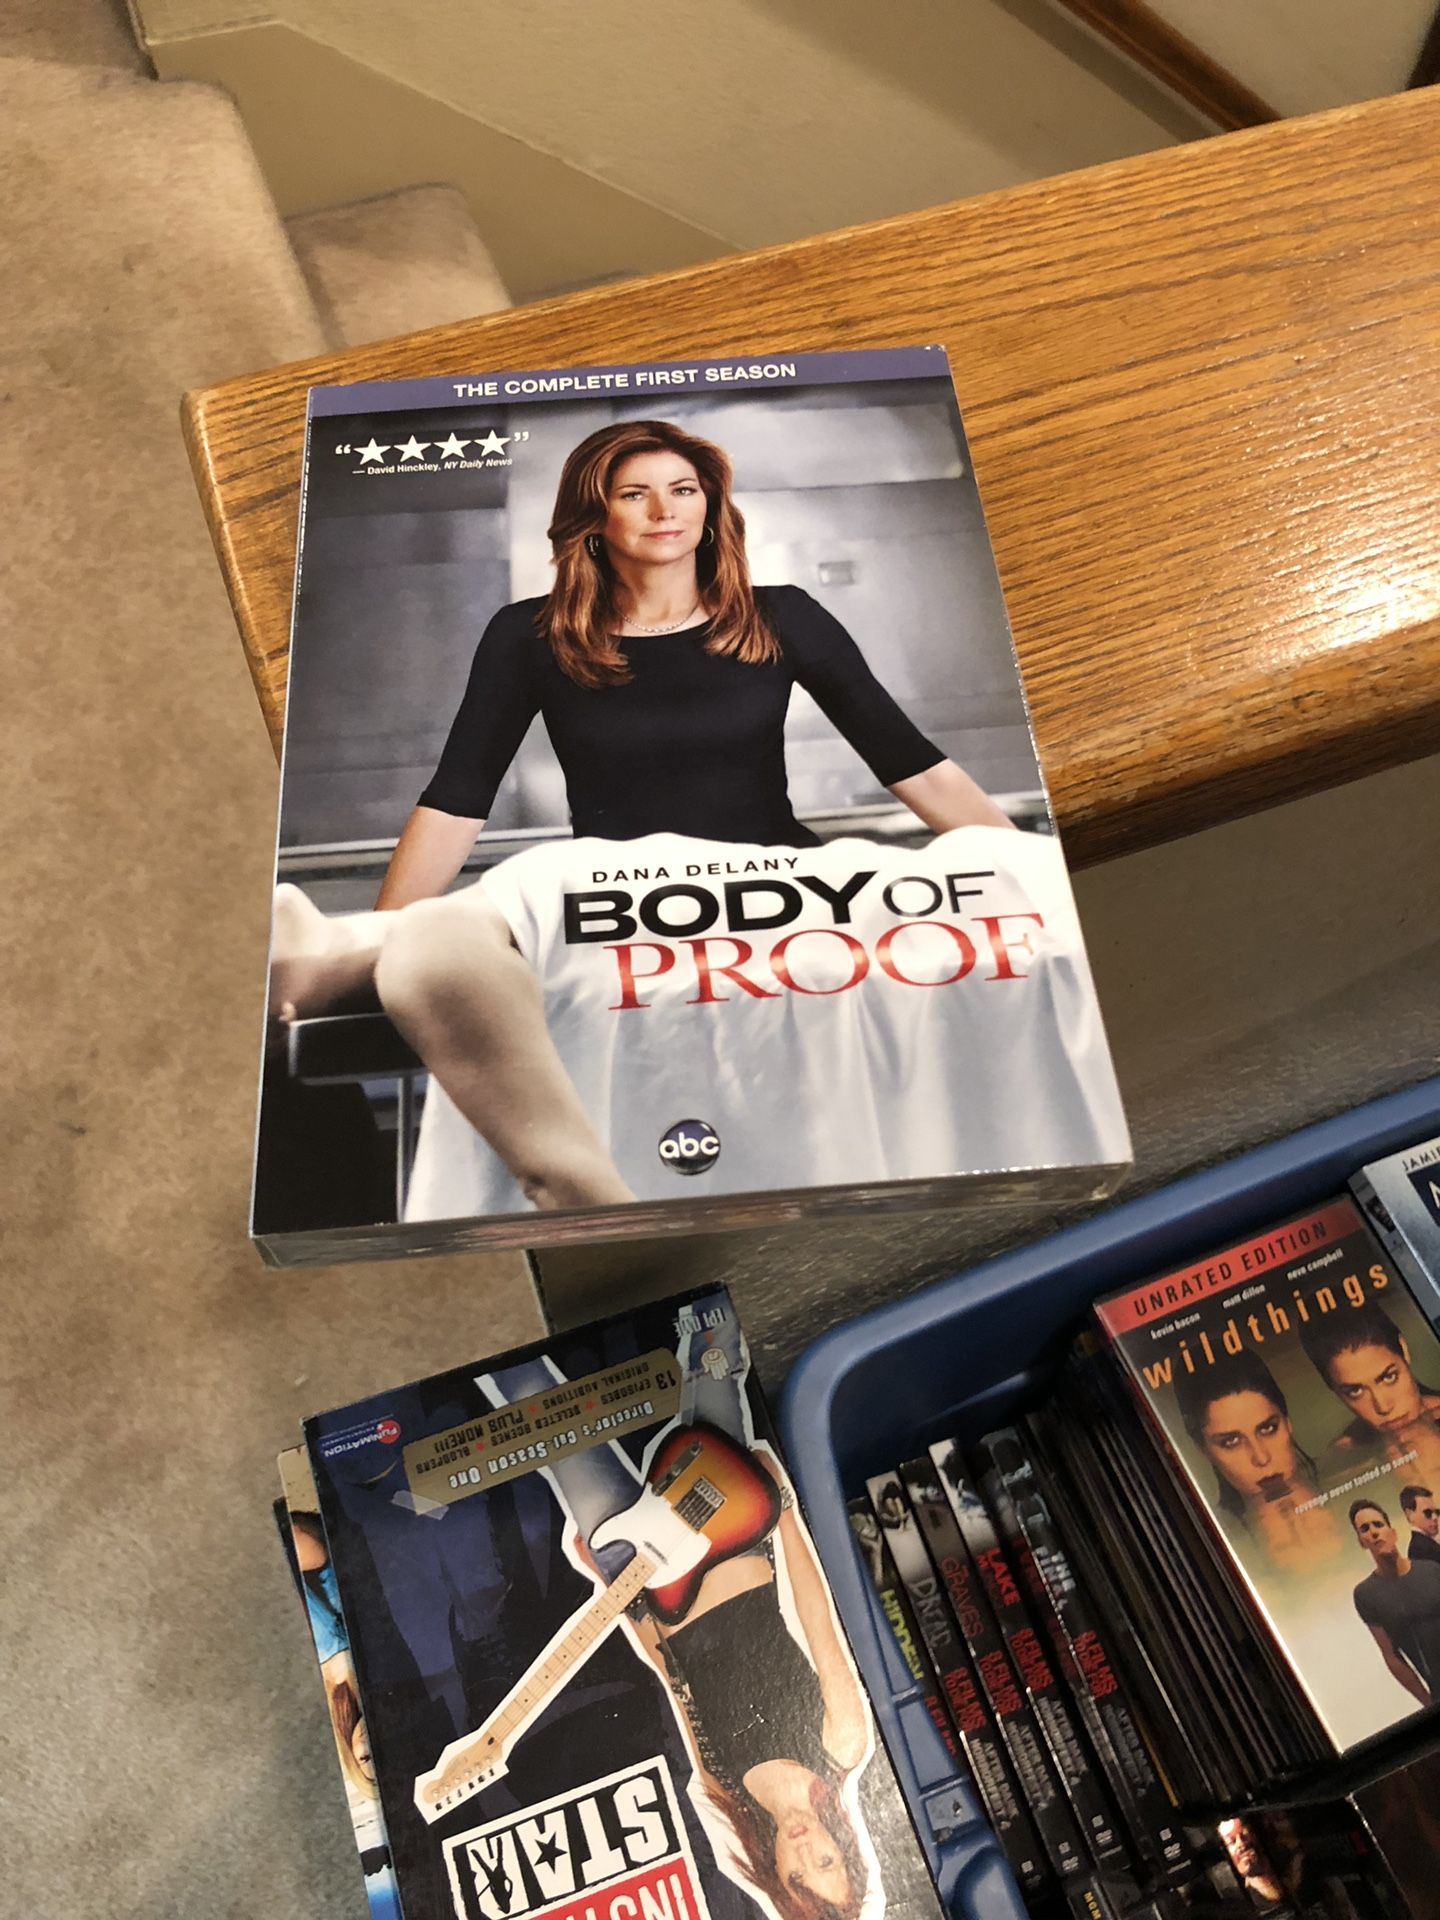 Body Of Proof The Complete First Season DVD Brand New Factory Sealed Box Set tv series one 1 s1 abc